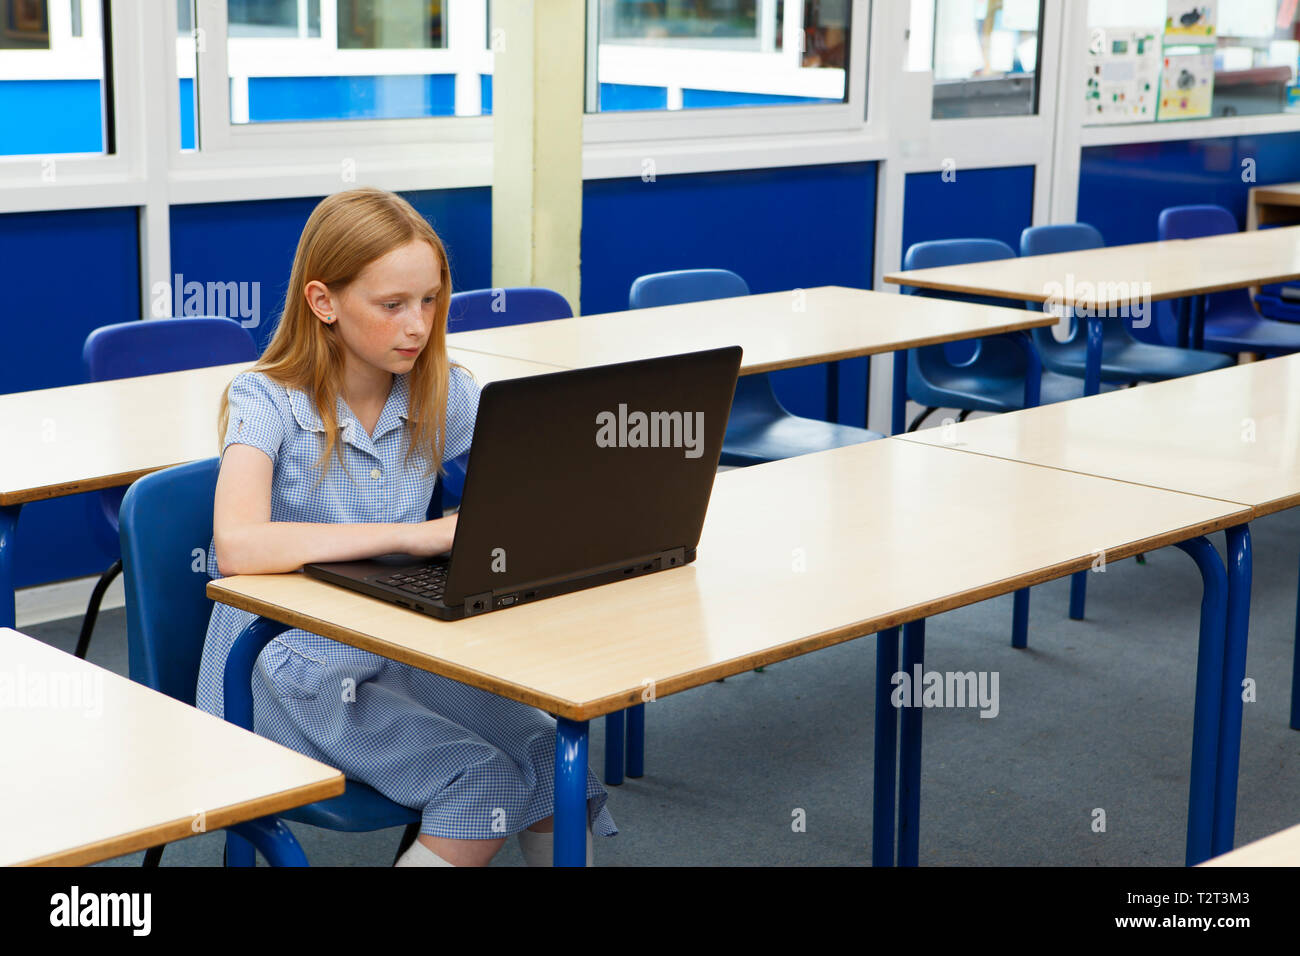 Primary school caucasian girl using a laptop in an empty classroom Stock Photo